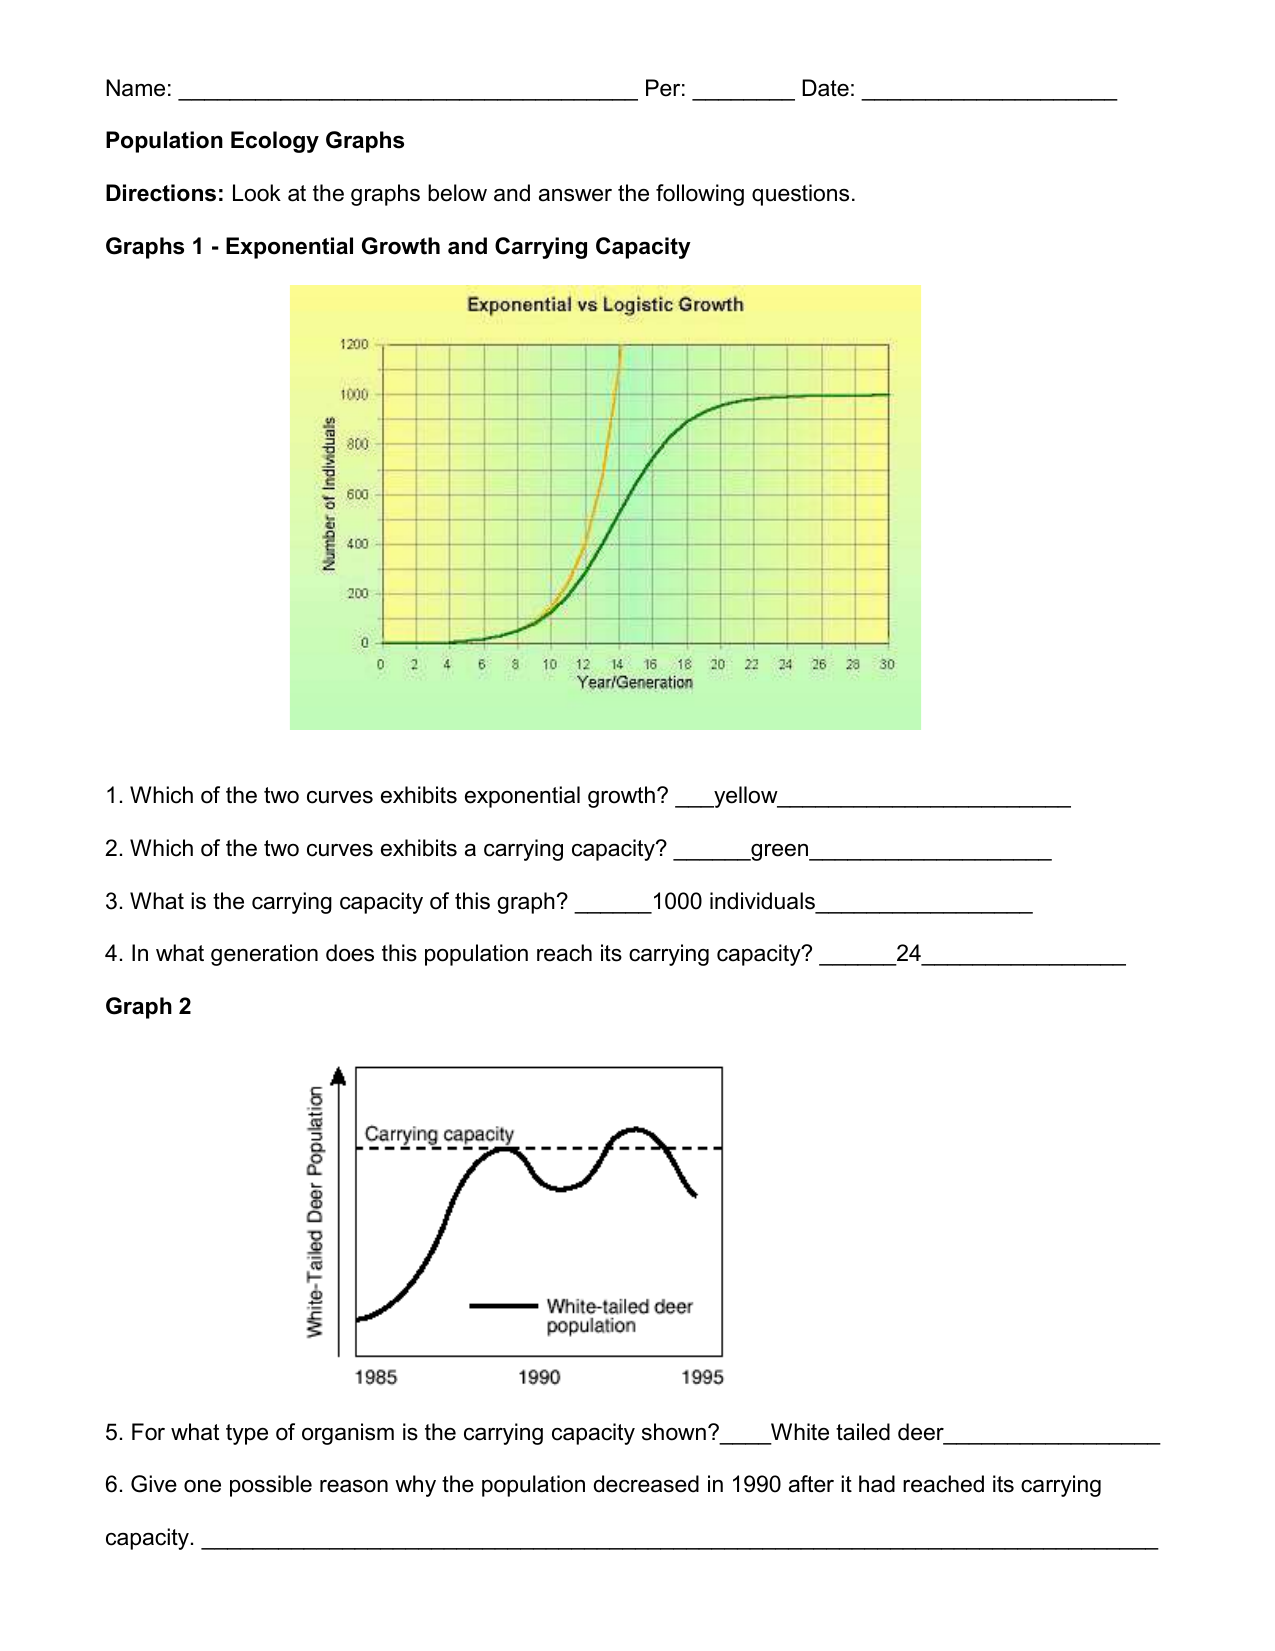 Population Ecology Graphs Worksheet Answers